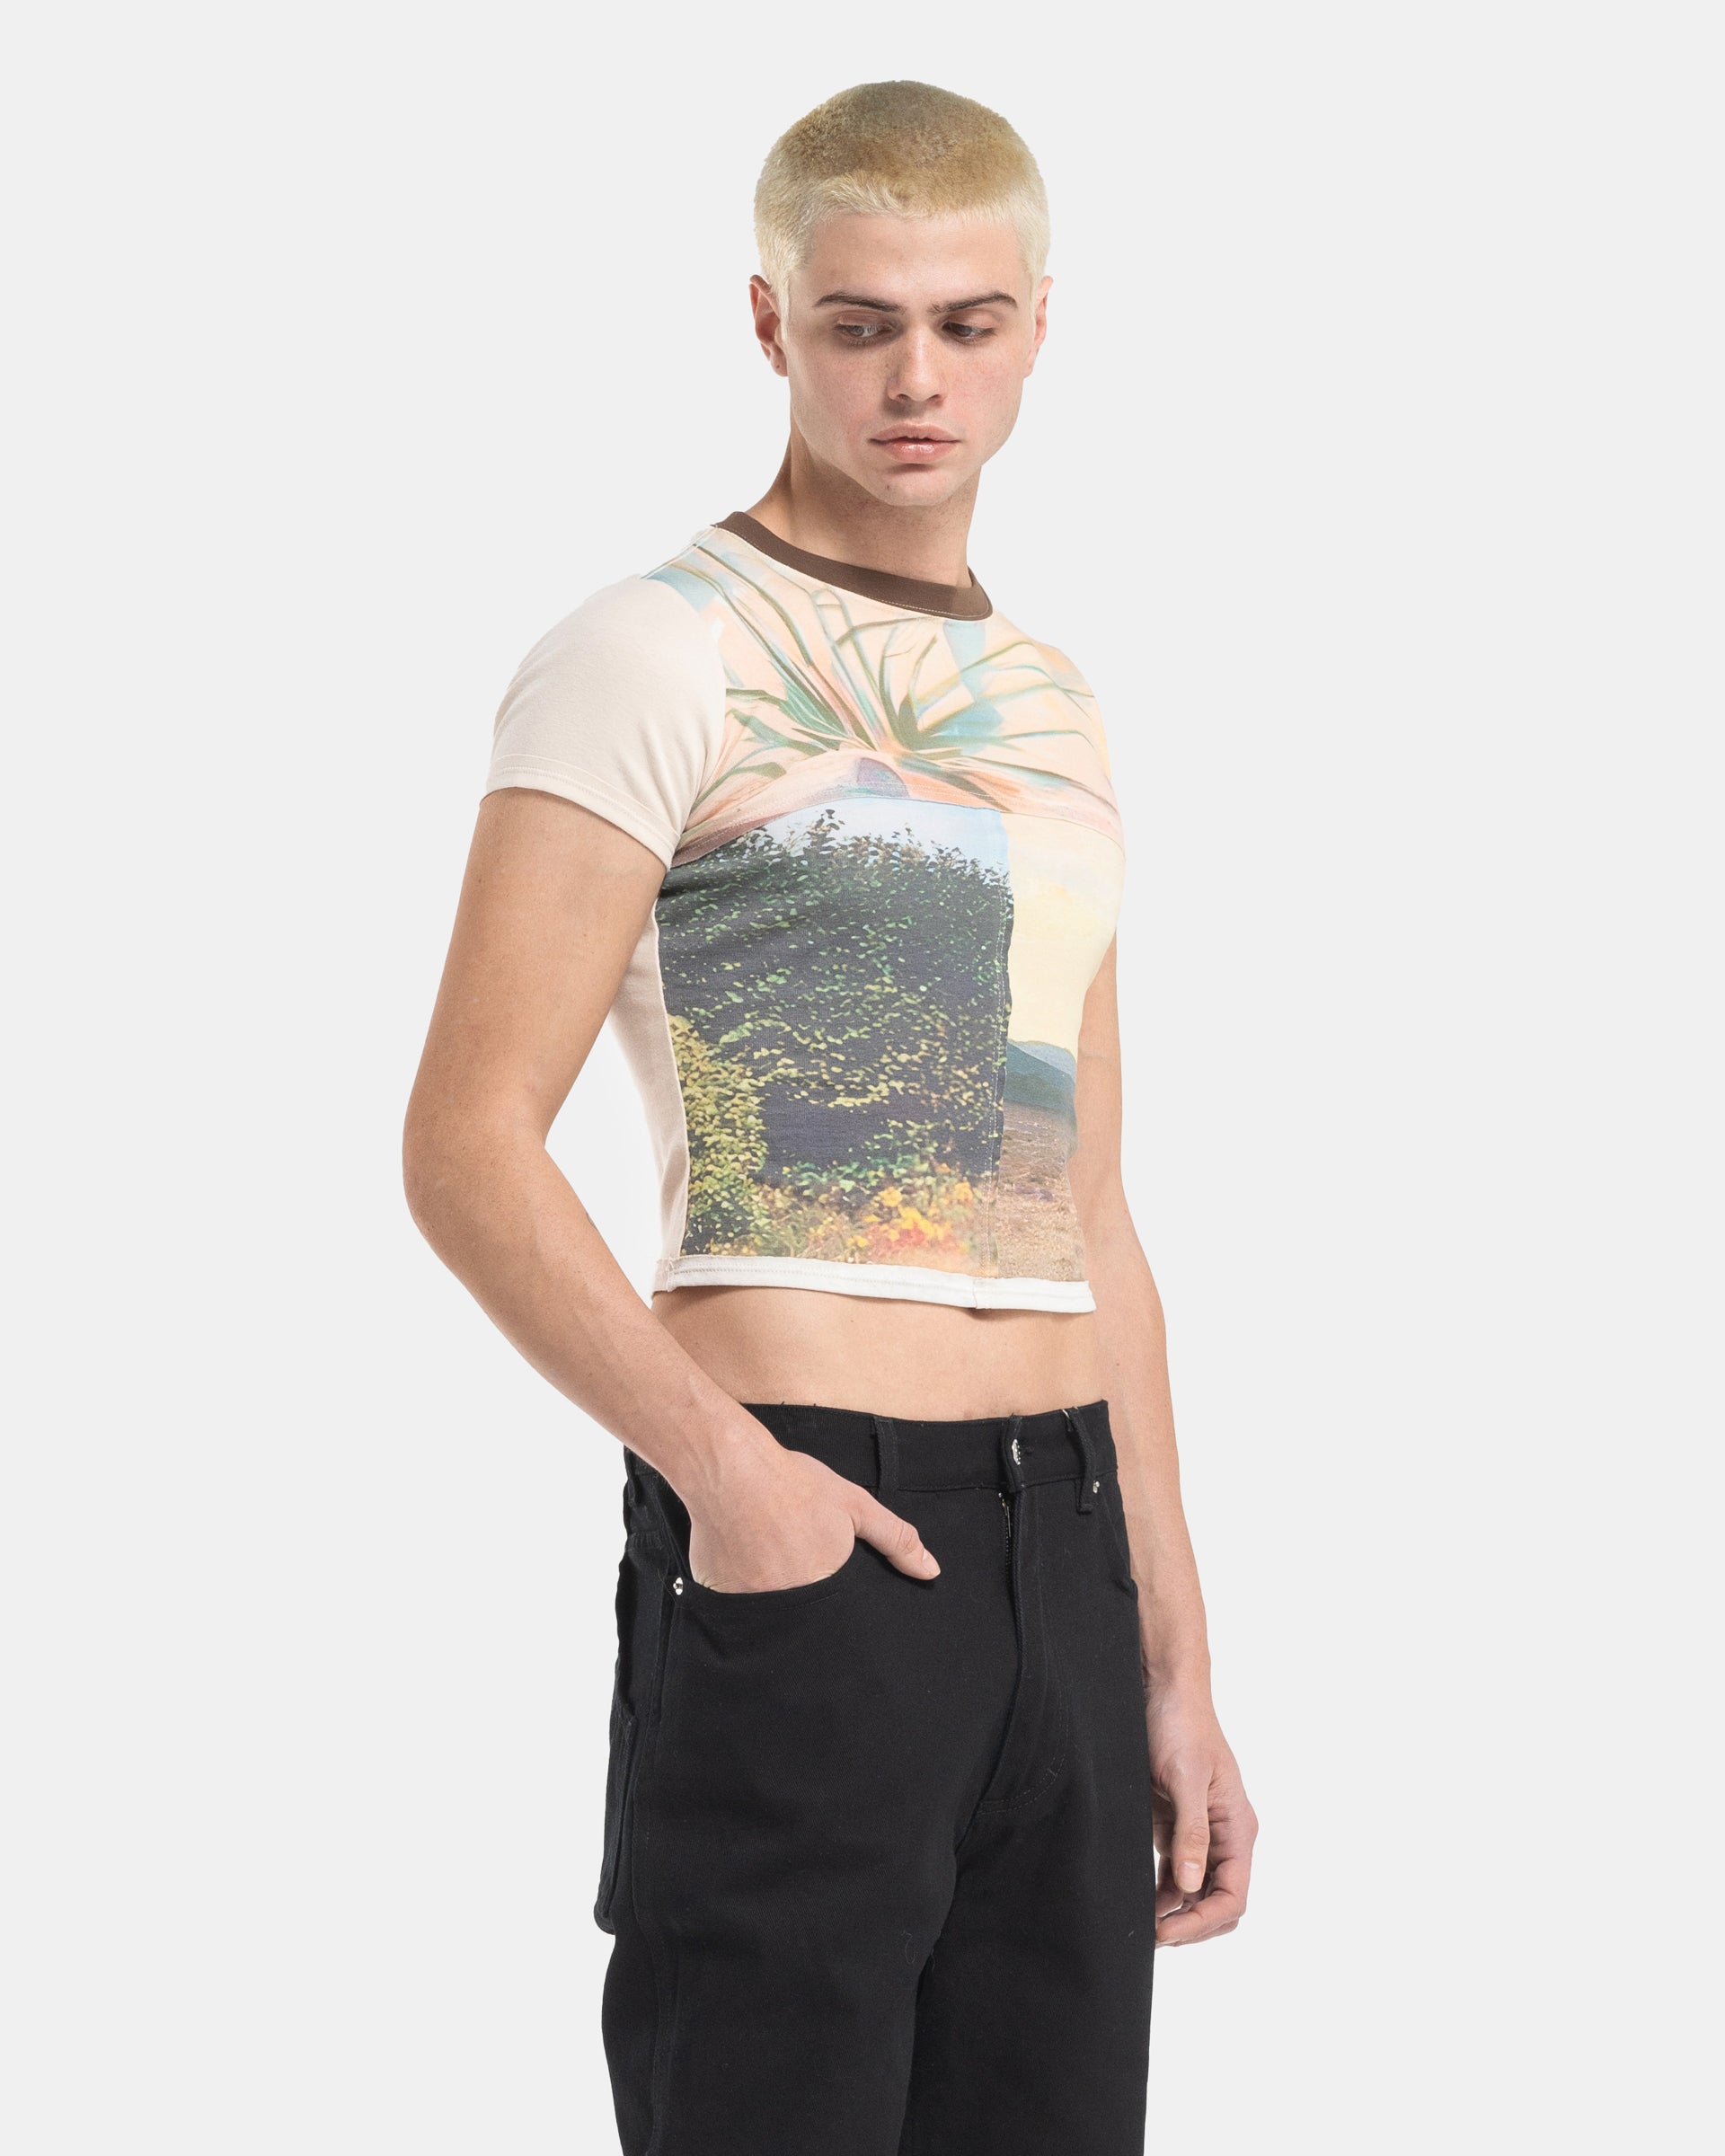 Male model wearing a Eckhaus Latta Lapped Baby Tee with a collage print design